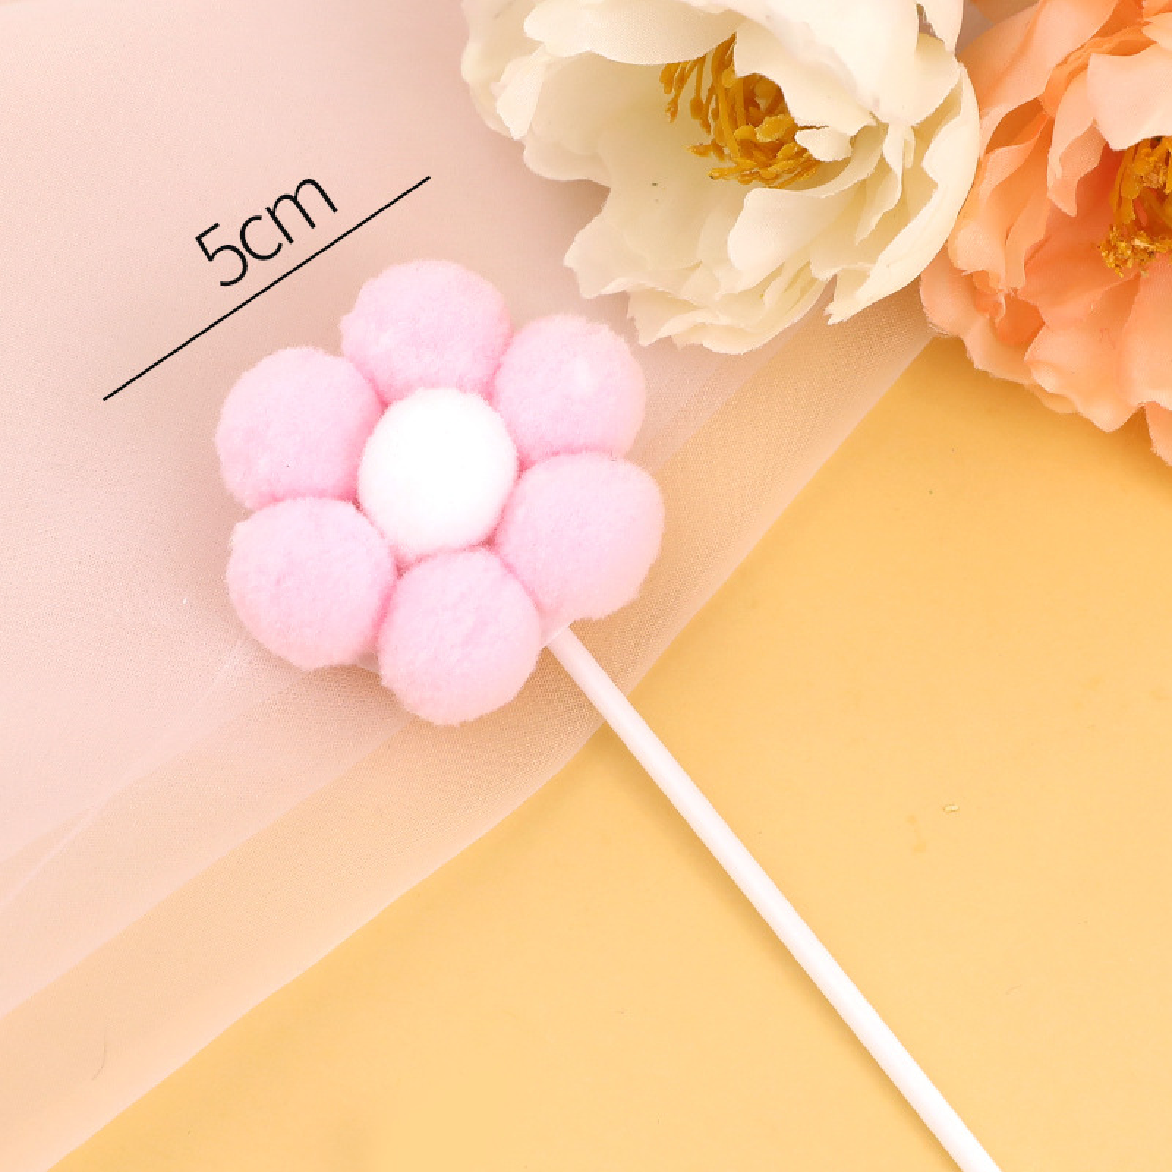 Cake Topper, Cake Decorations - Cotton Fluffy Daisy - Pink